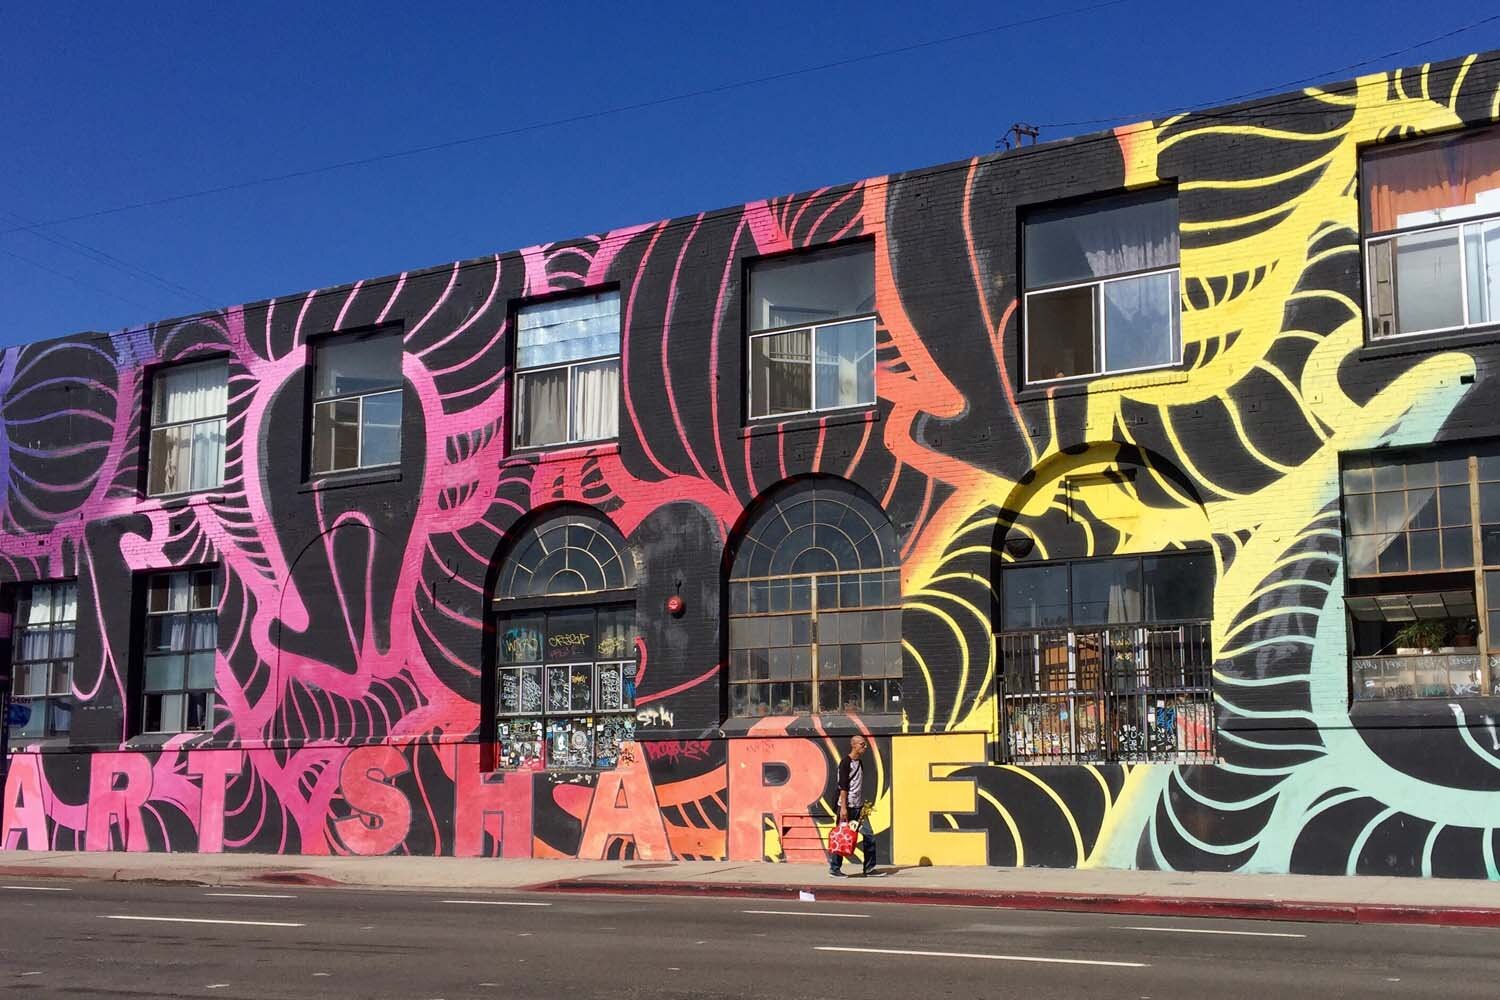 Exploring Los Angeles through the cities and neighborhoods that